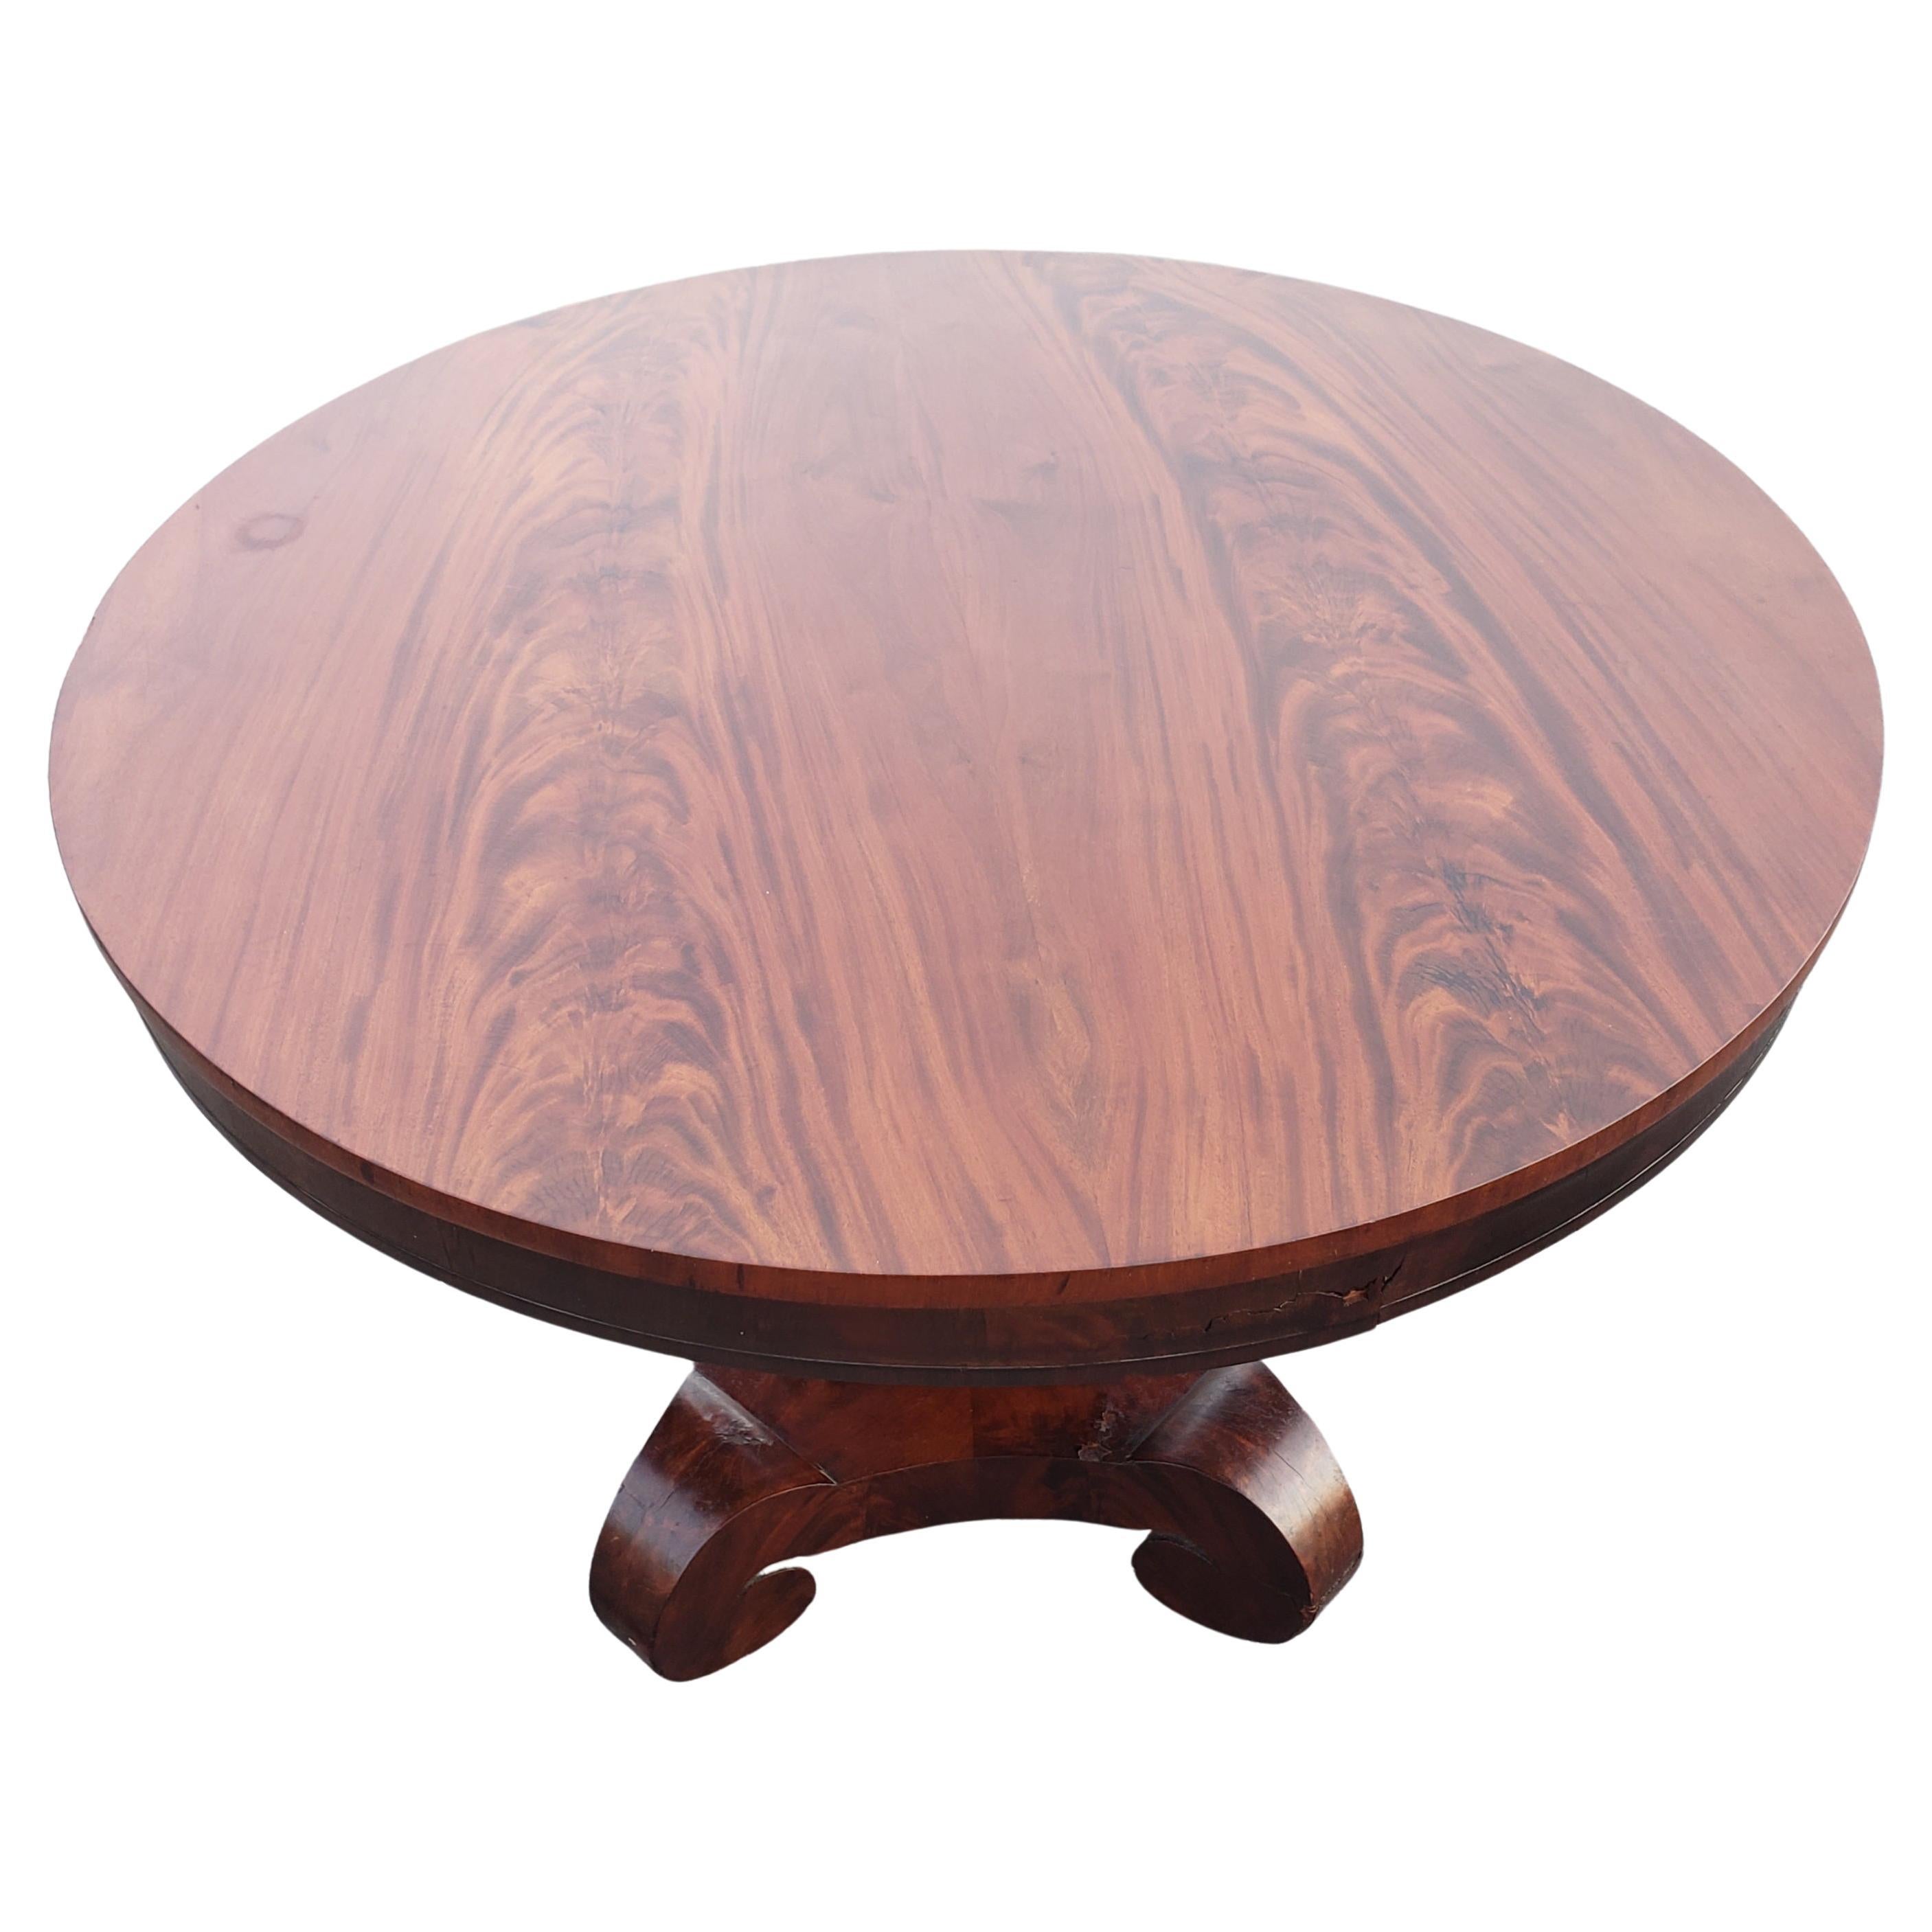 Hand-Crafted American Empire Flame Mahogany Center Table, Circa 1850s